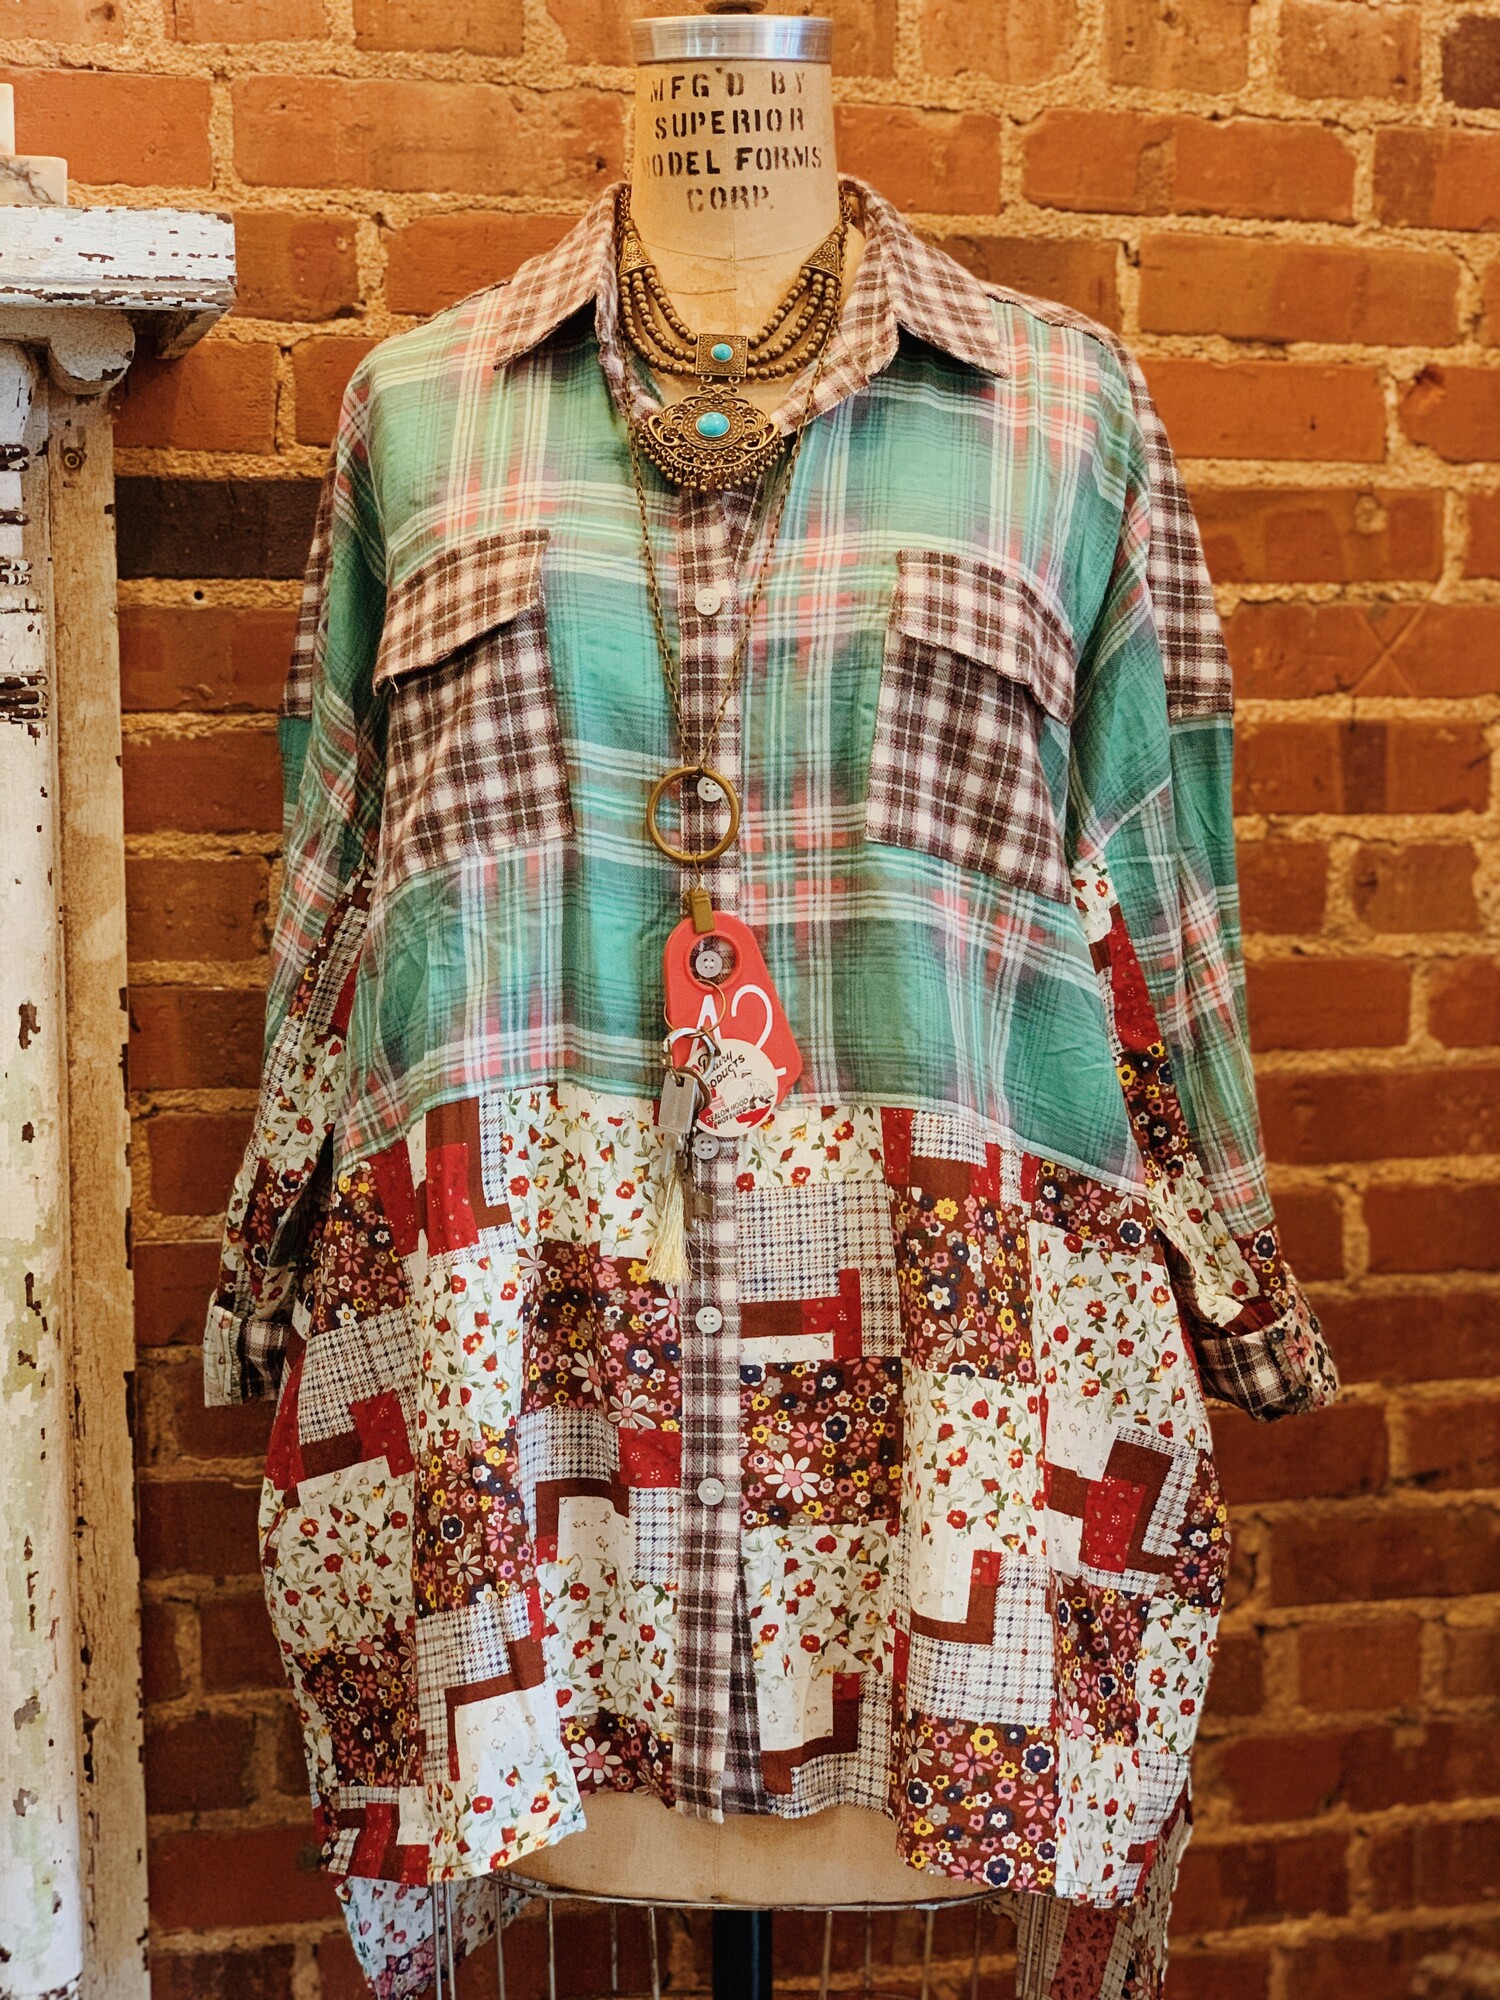 This adorable patchwork shirt is perfect on its own, or you can pair it with a tee! The fabric is a medley of flannels, plaids, and florals!